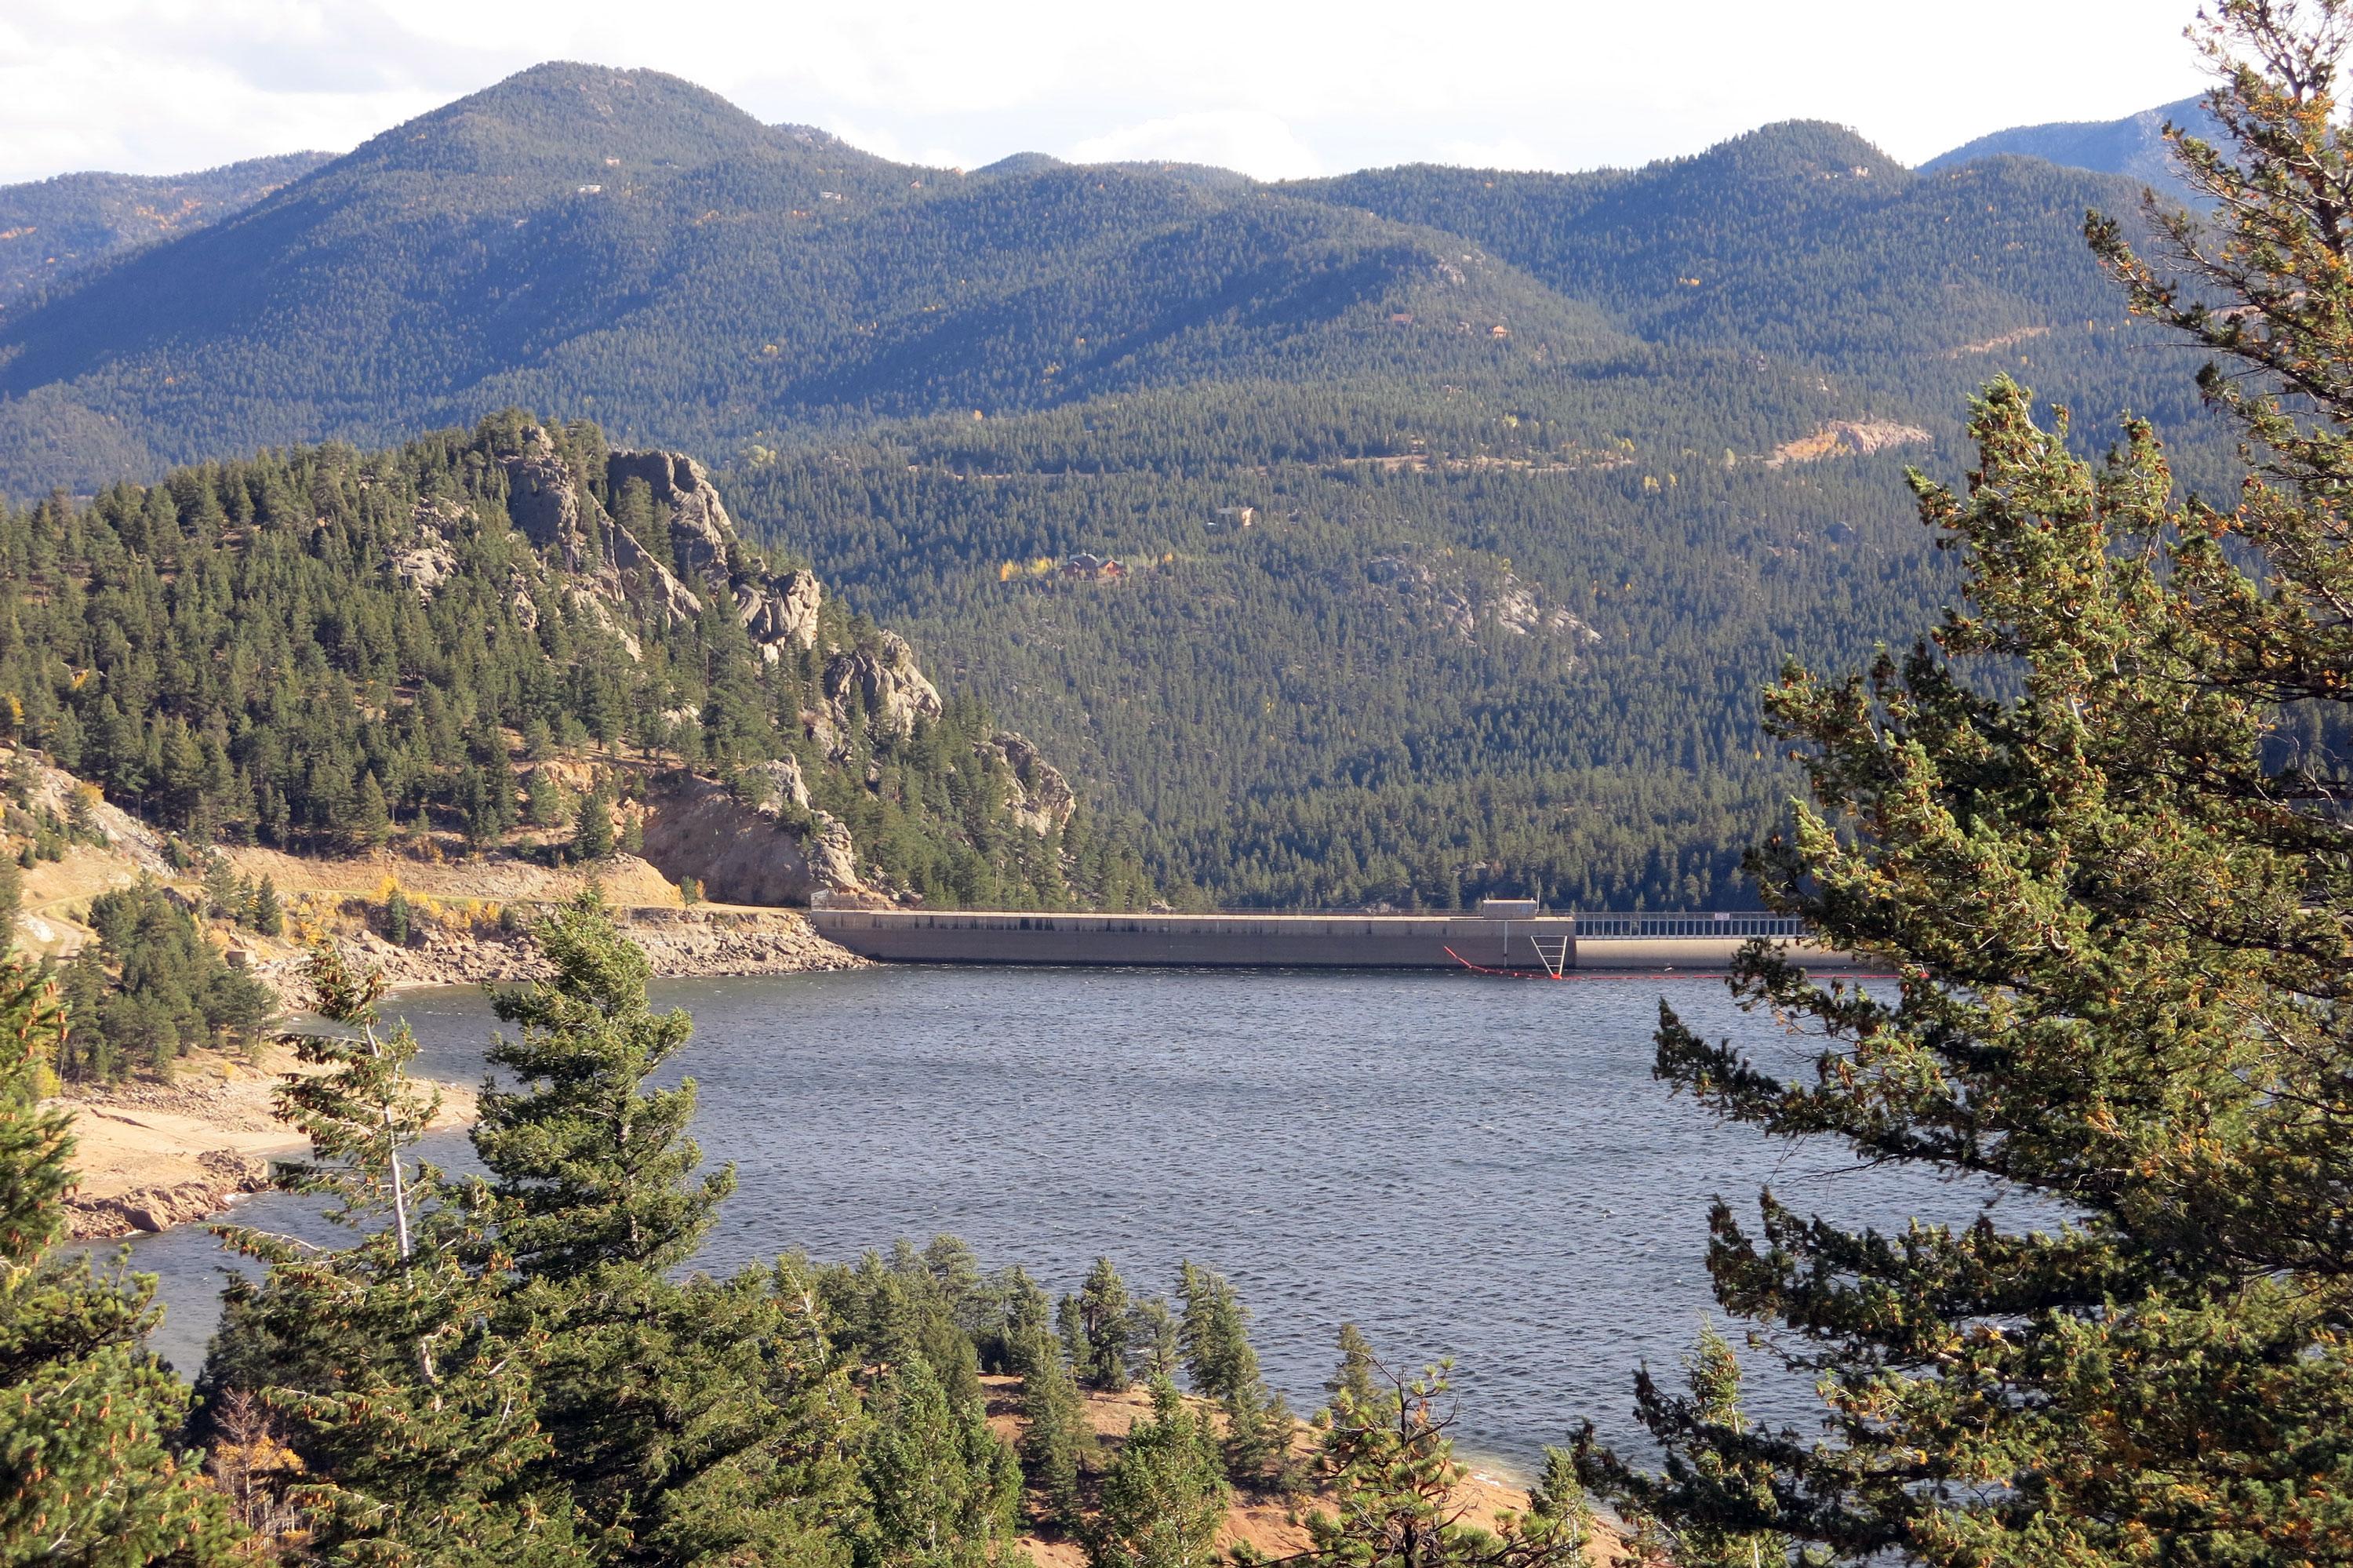 A panoramic view of Gross Reservoir, surrounded by evergreen tree-filled mountains.